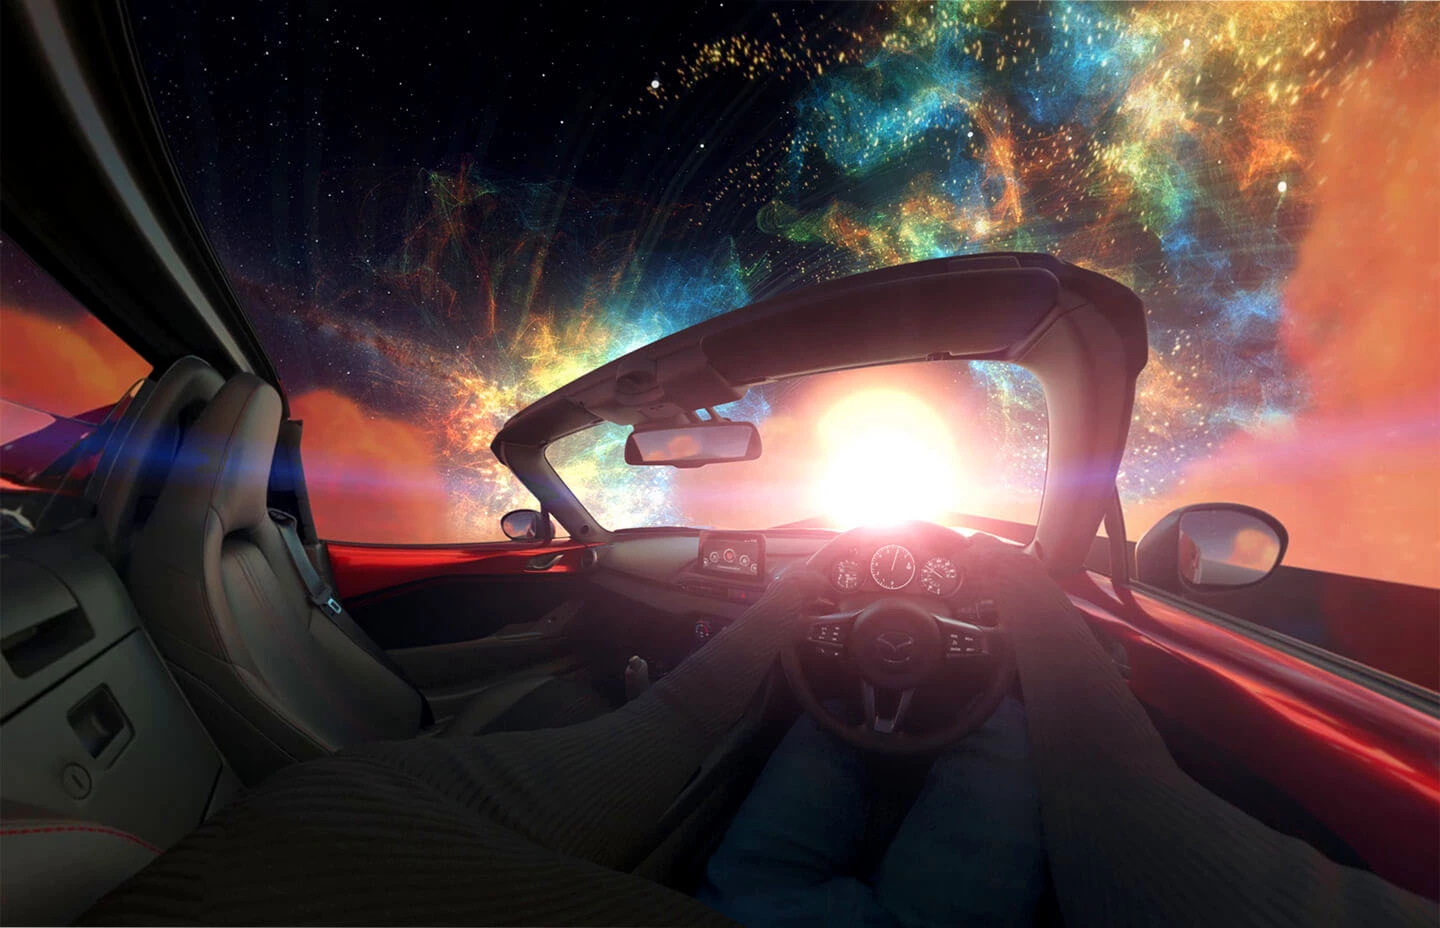 First person view of driving a Mazda X5 into a portal in space as part of the Mazda X5 virtual reality experience